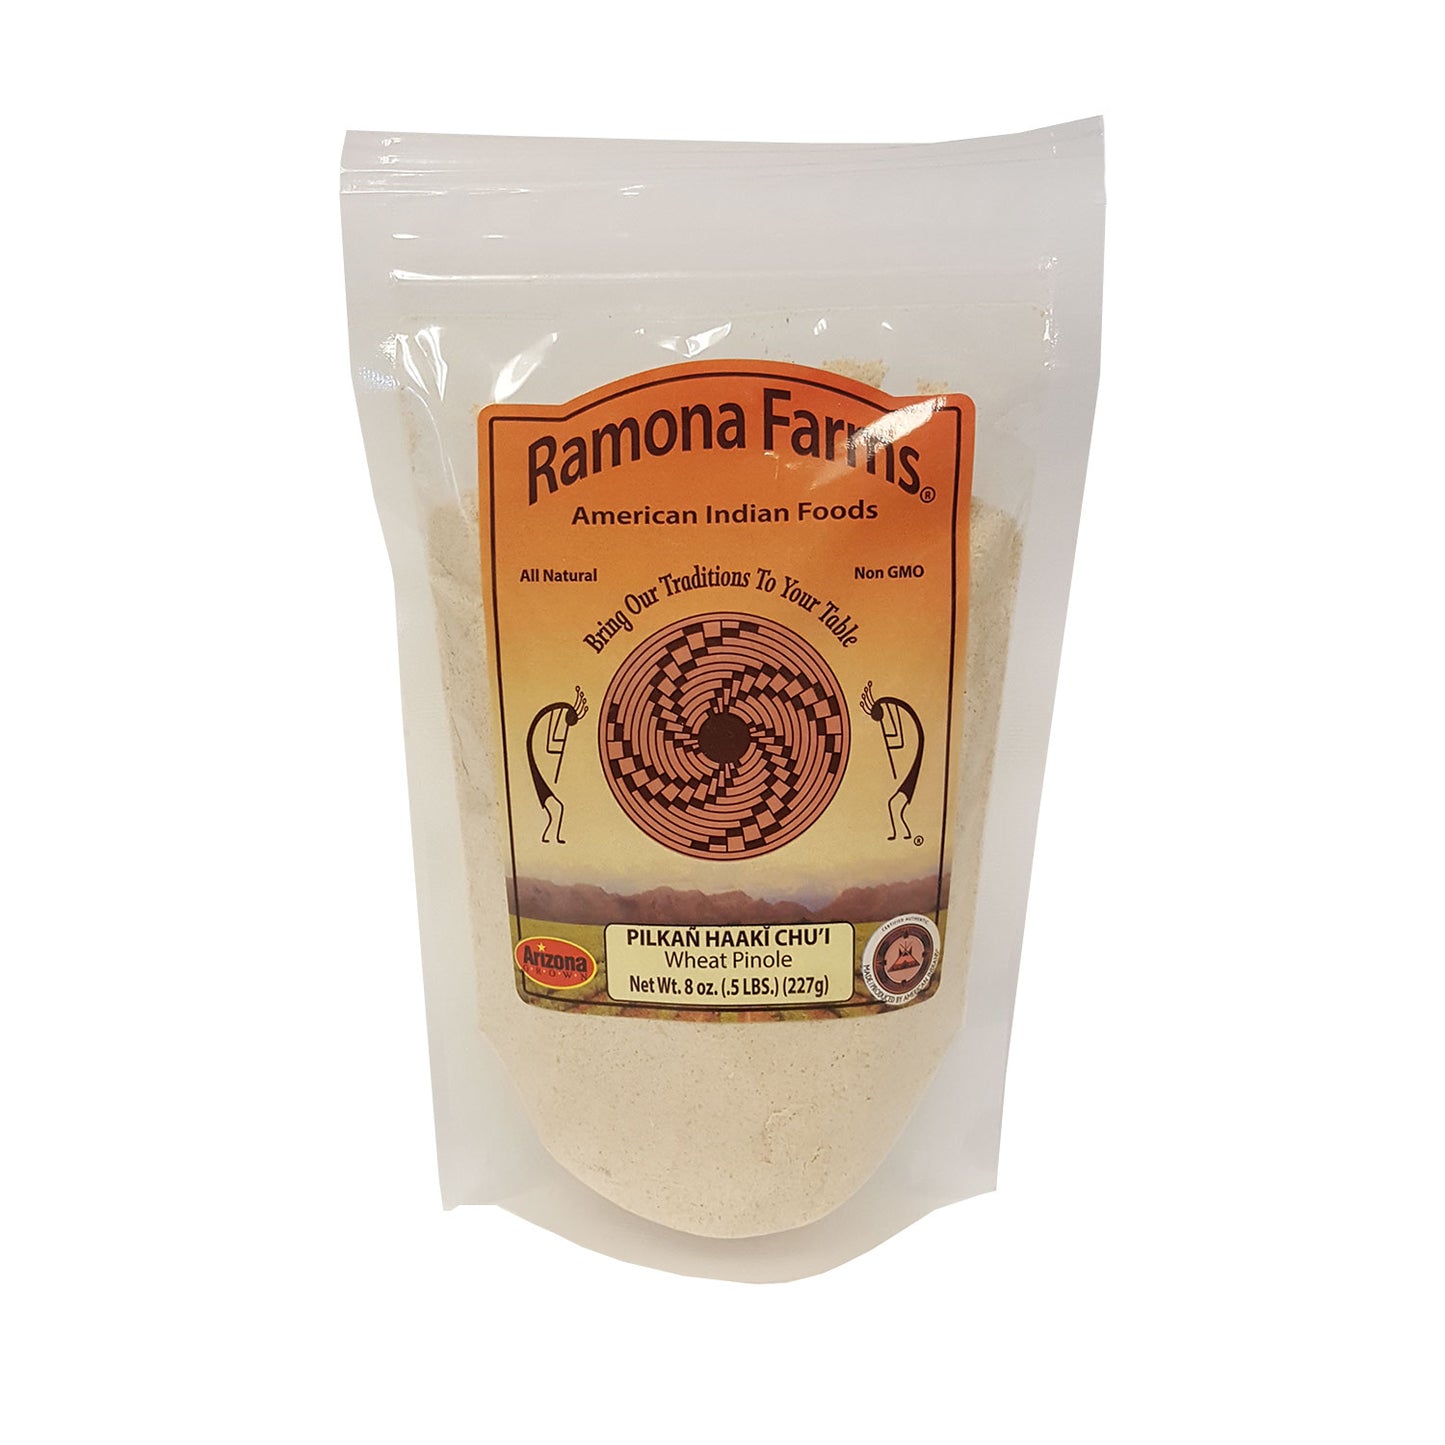 Organic Heirloom Pima Club Wheat Pinole made from mesquite parched and stone milled wheat berries.